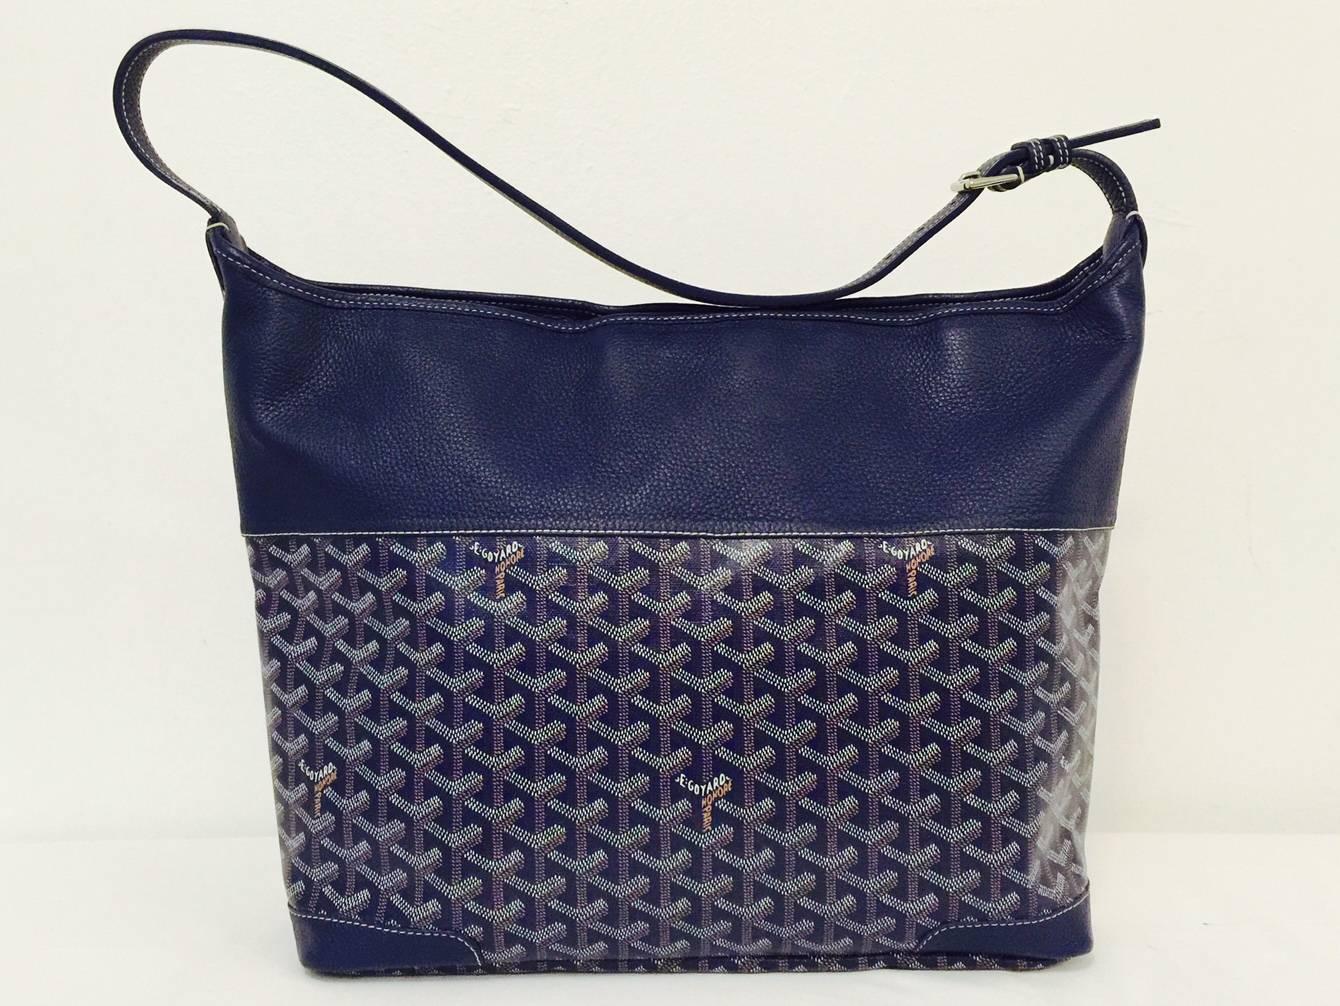 New Goyard Blue Grenadines Tote is a must for those who desire something special from this legendary leather goods maker!  This hobo tote features iconic chevron patterned canvas, silver-tone hardware, adjustable shoulder strap and beautiful blue